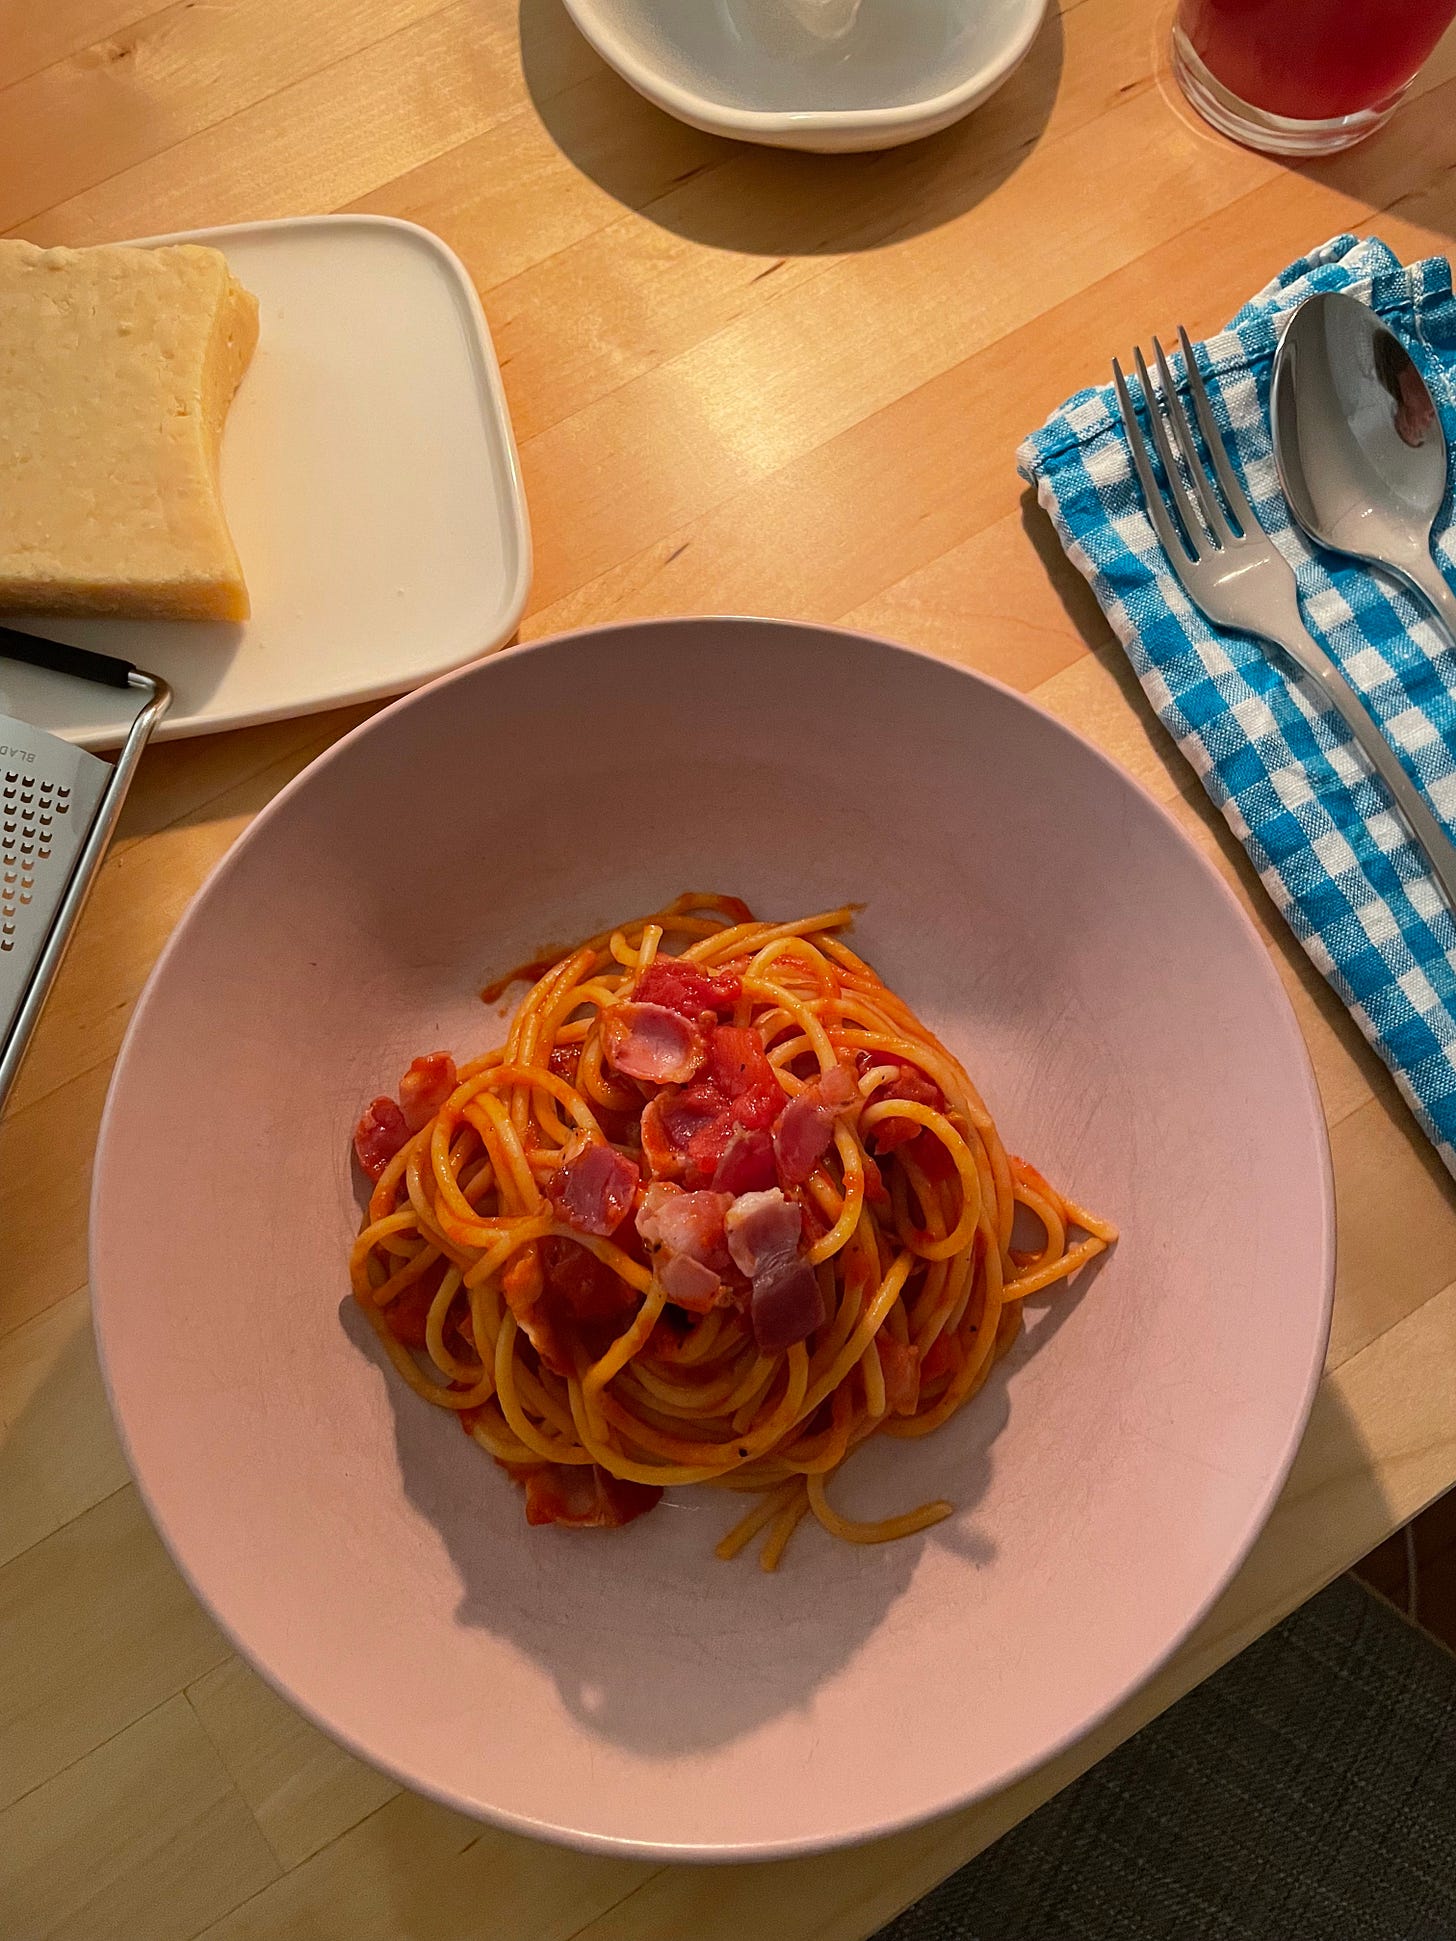 Pink bowl of spaghetti all'amatricana with Parmesan cheese nearby. A candle-lit dinner with a blue and white gingham napkin and spoon and fork nearby.